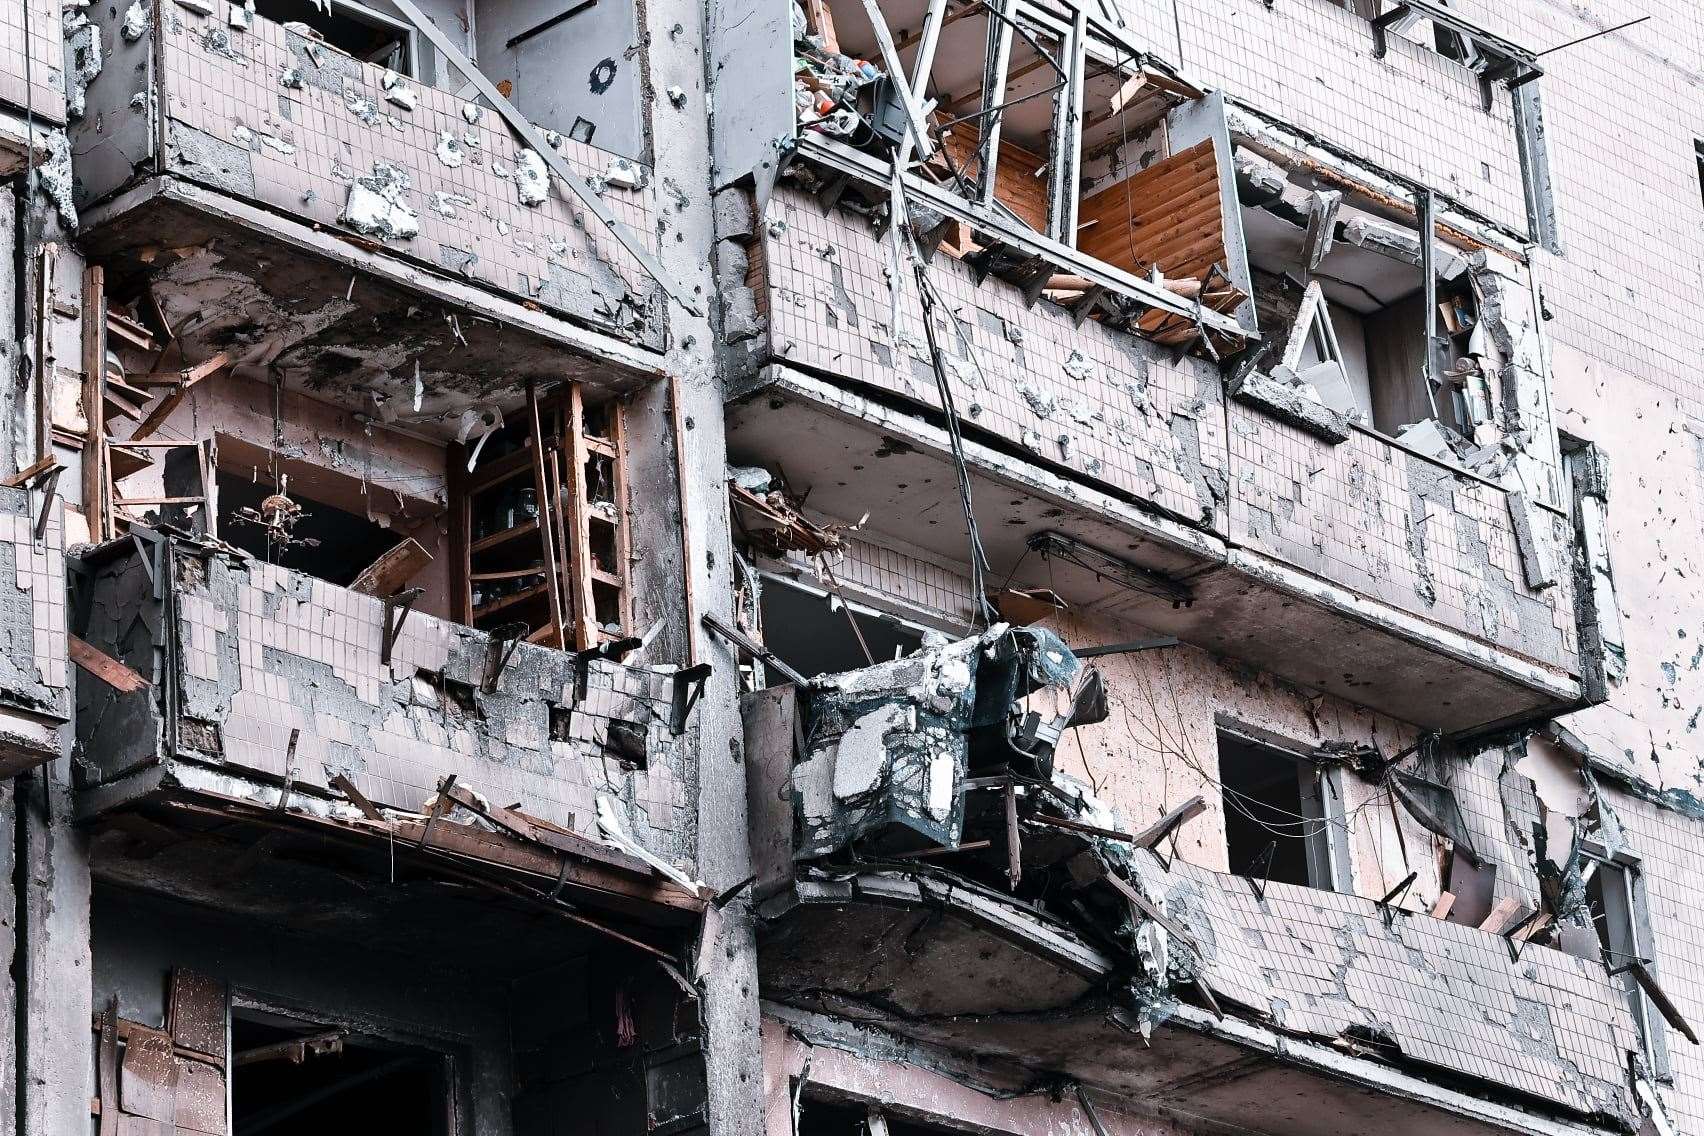 Damage to property in Kyiv, Ukraine, caused by an explosion during Russia’s invasion of Ukraine day after Russia invaded Ukraine (Maia Mikhaluk/PA)